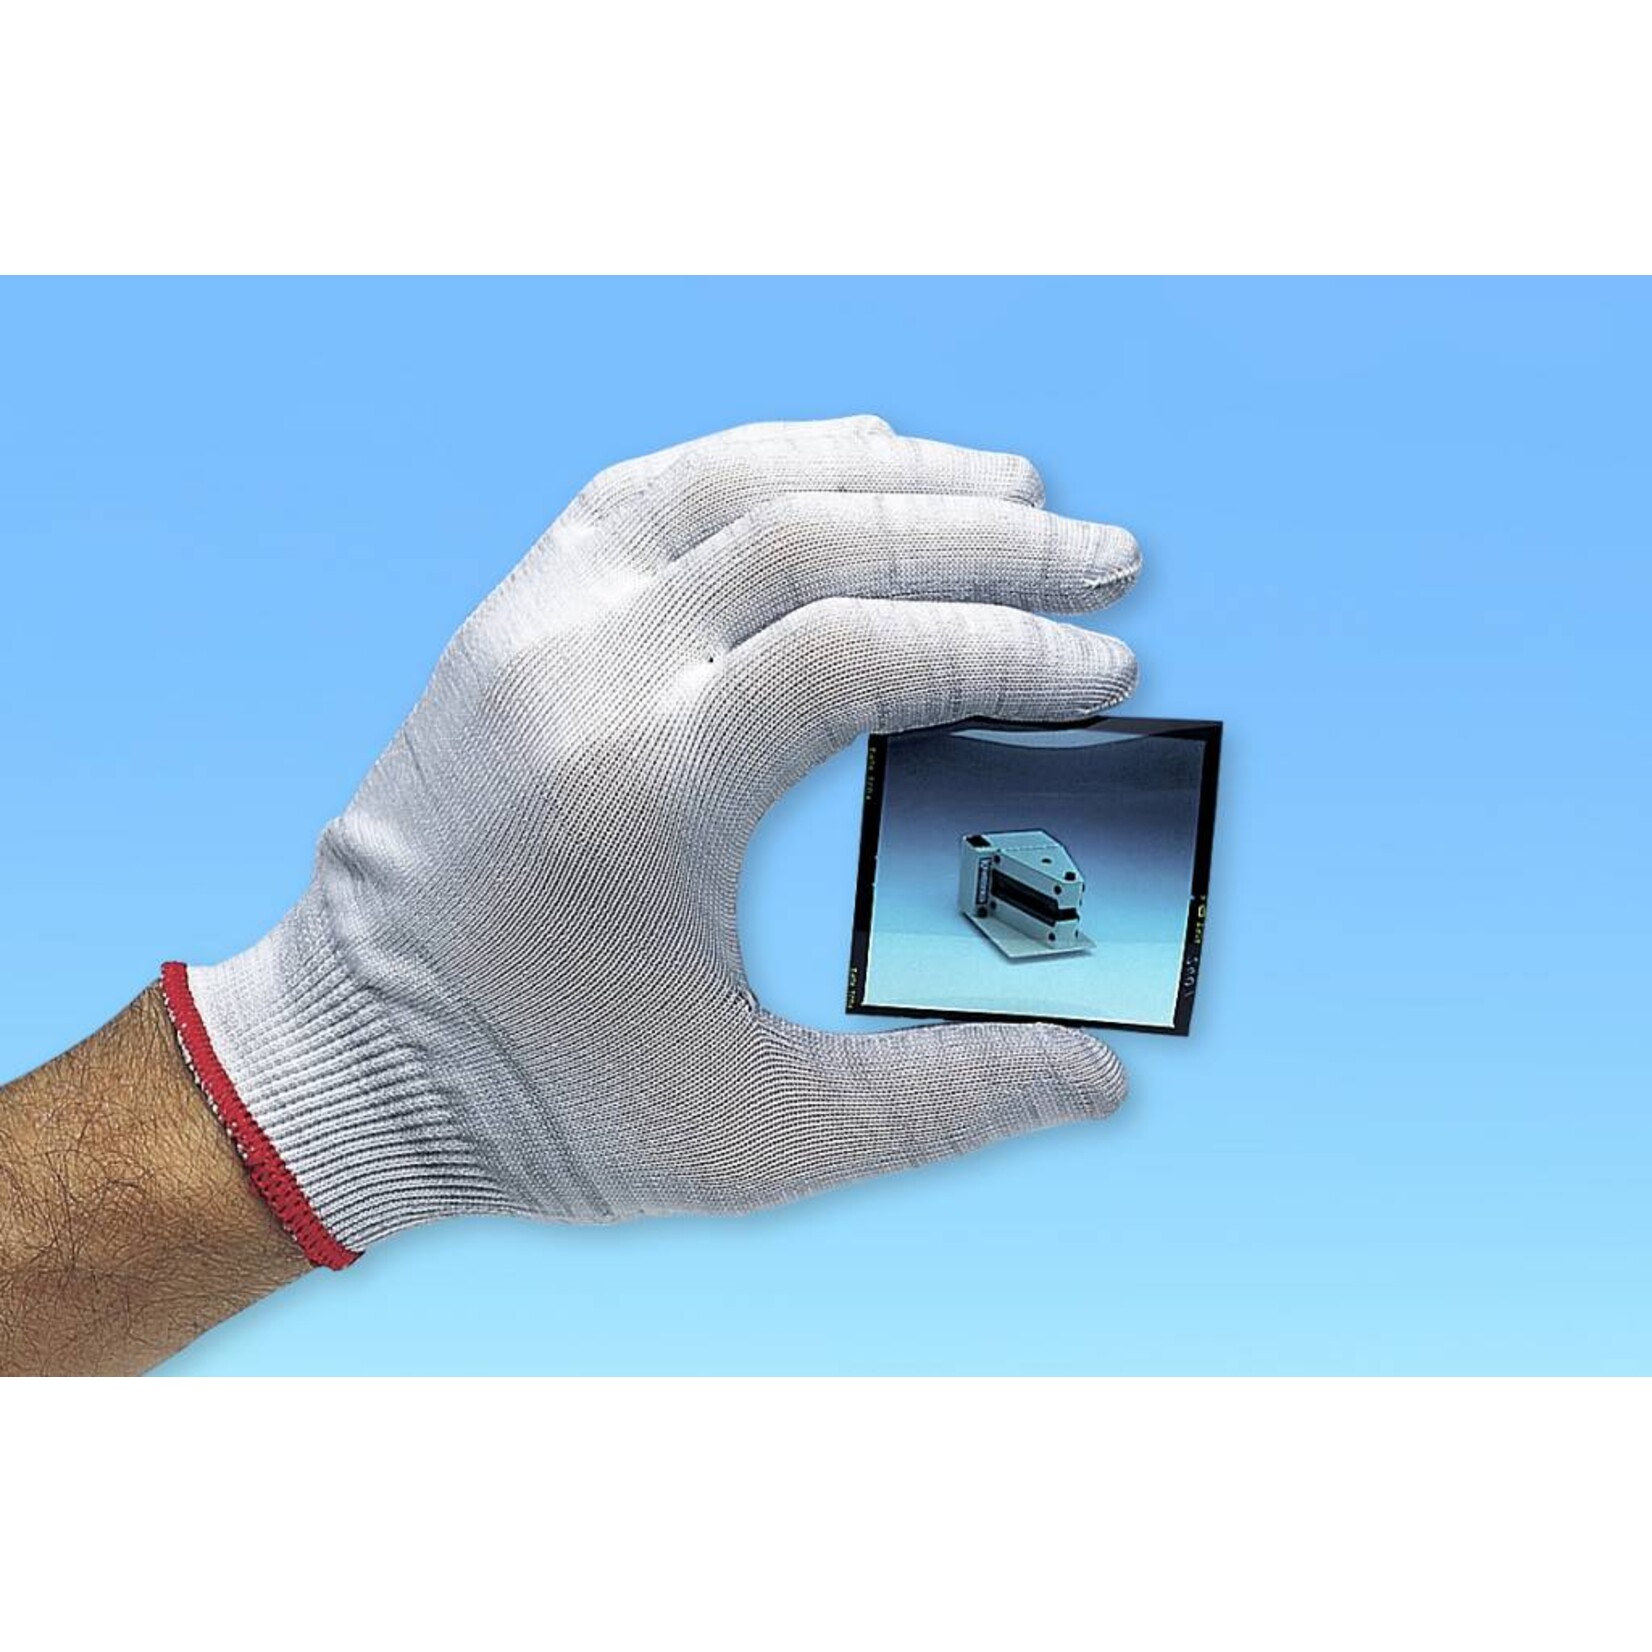 Antistatic gloves ASG-L without chemical impregnation